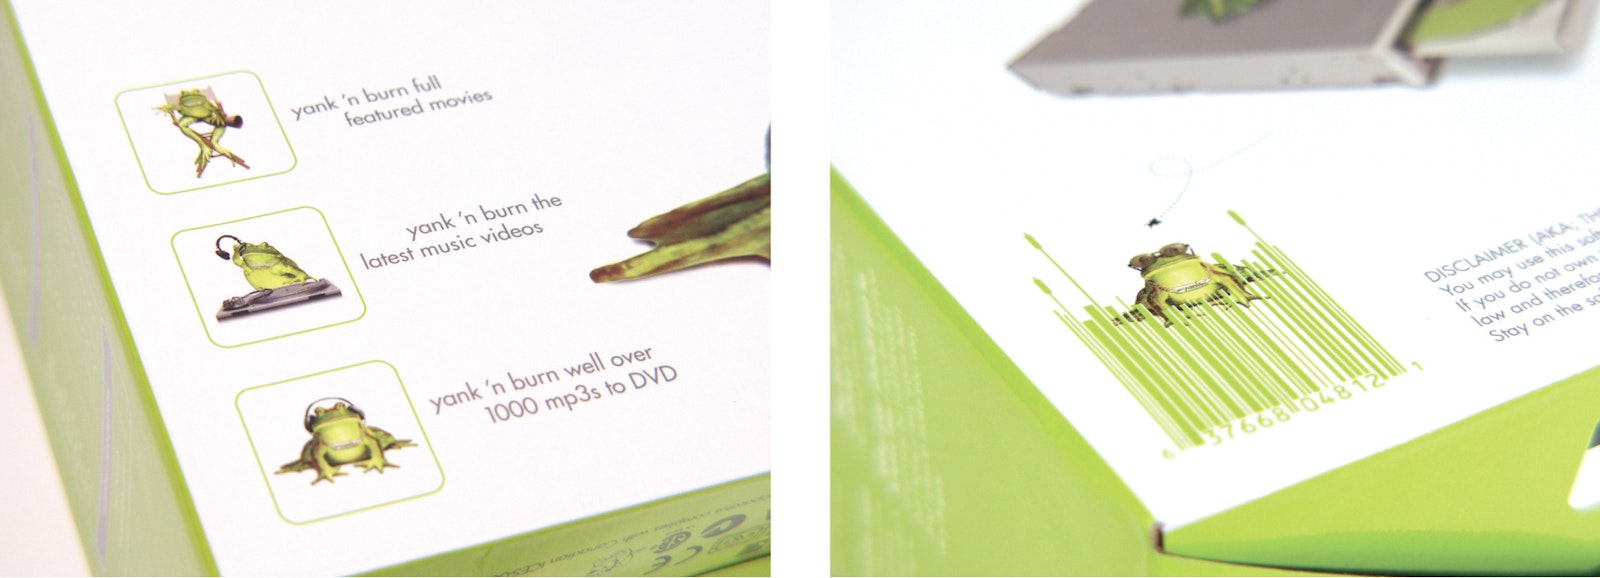 Yank packaging box design graphics with frog character instructions and bar code design.